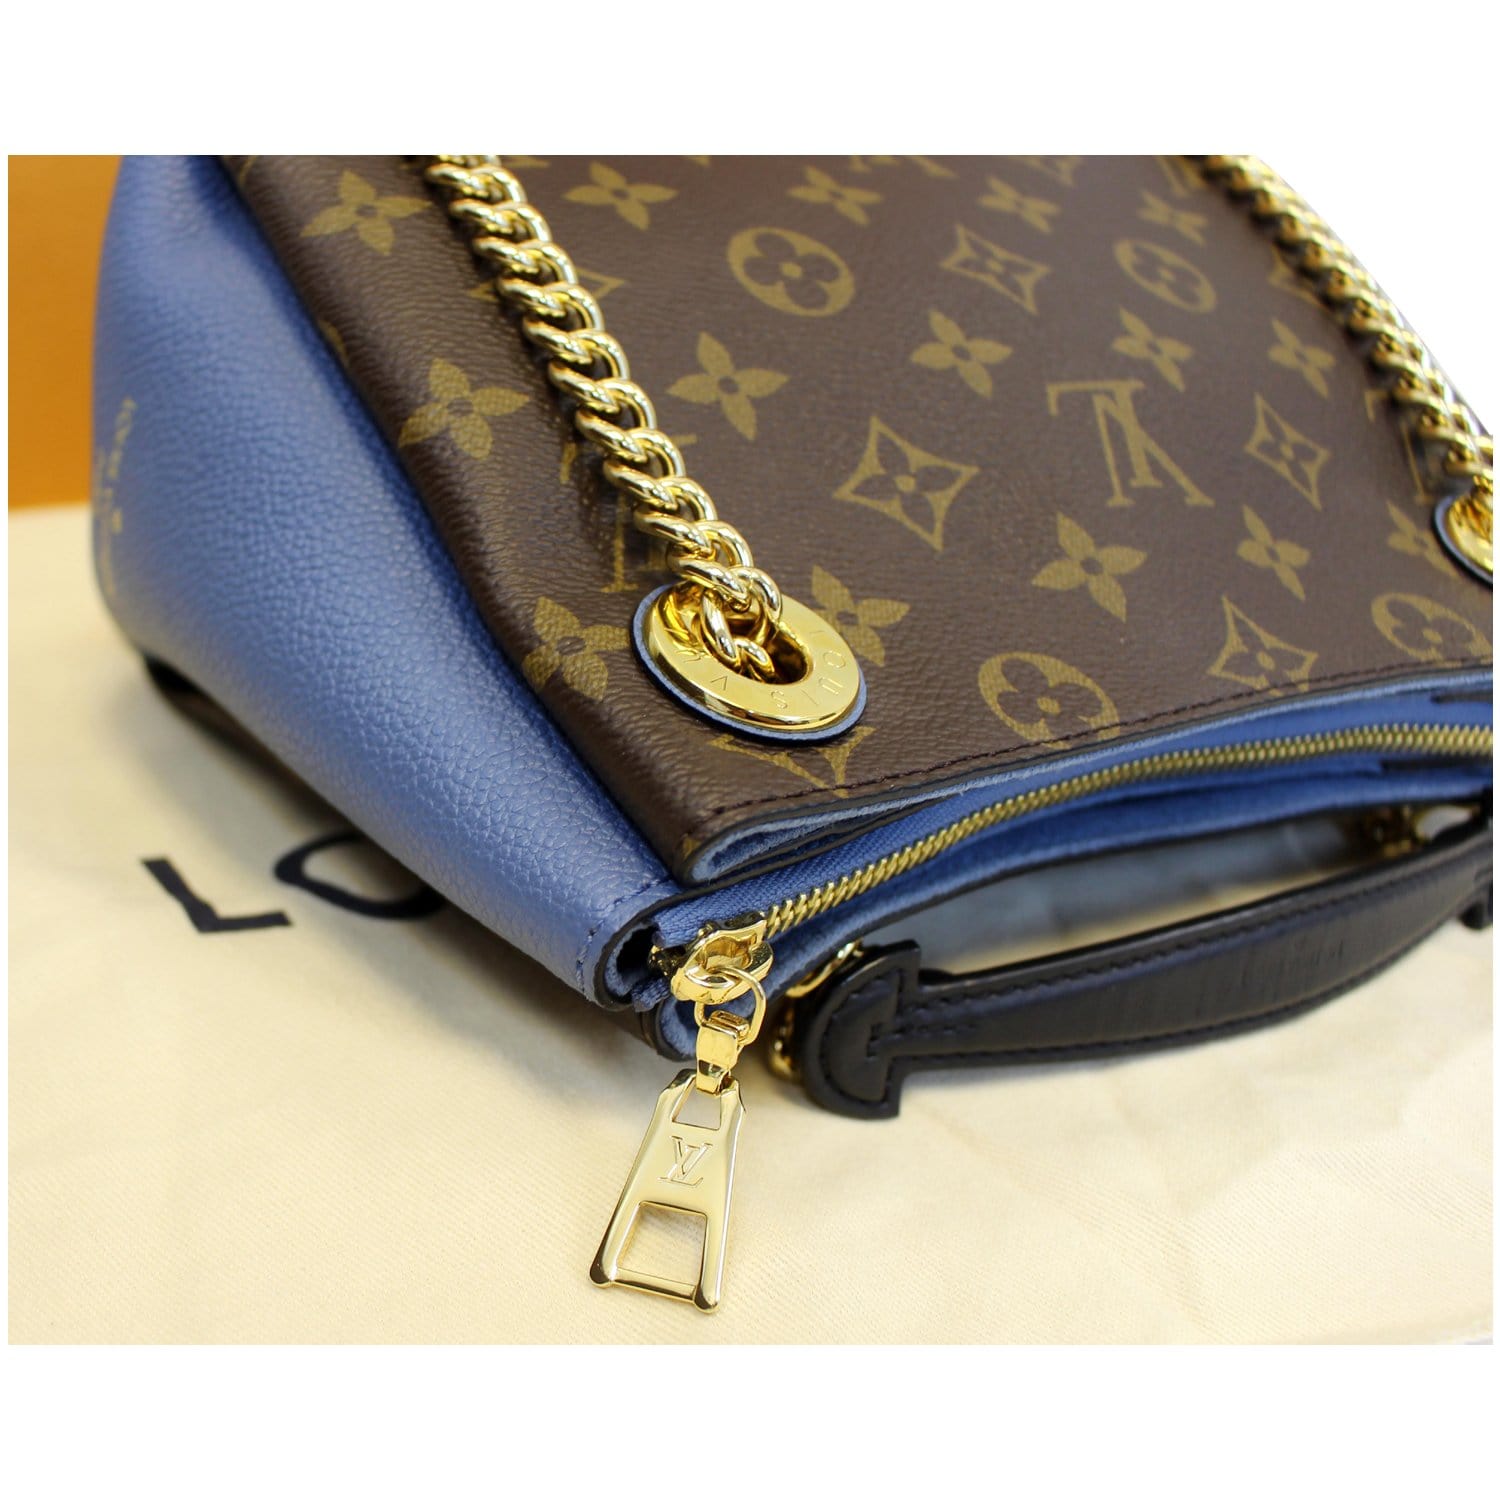 Oversized Louis Vuitton/Supreme handbag with blue handle by Norman